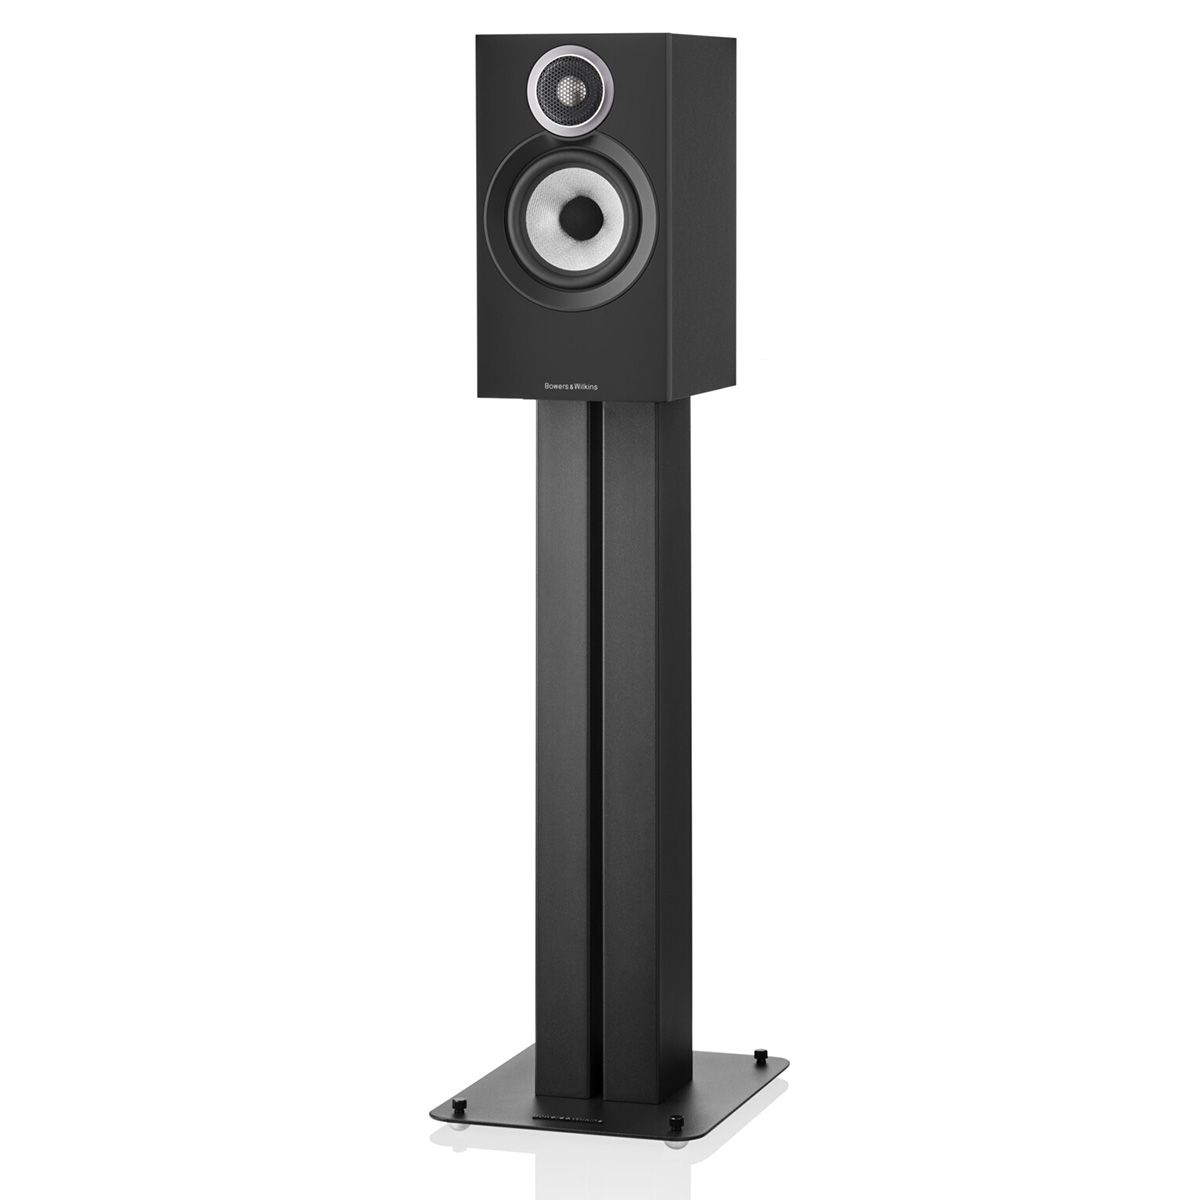 Bowers & Wilkins 607 S3 Bookshelf speaker at an angle without grille on a stand